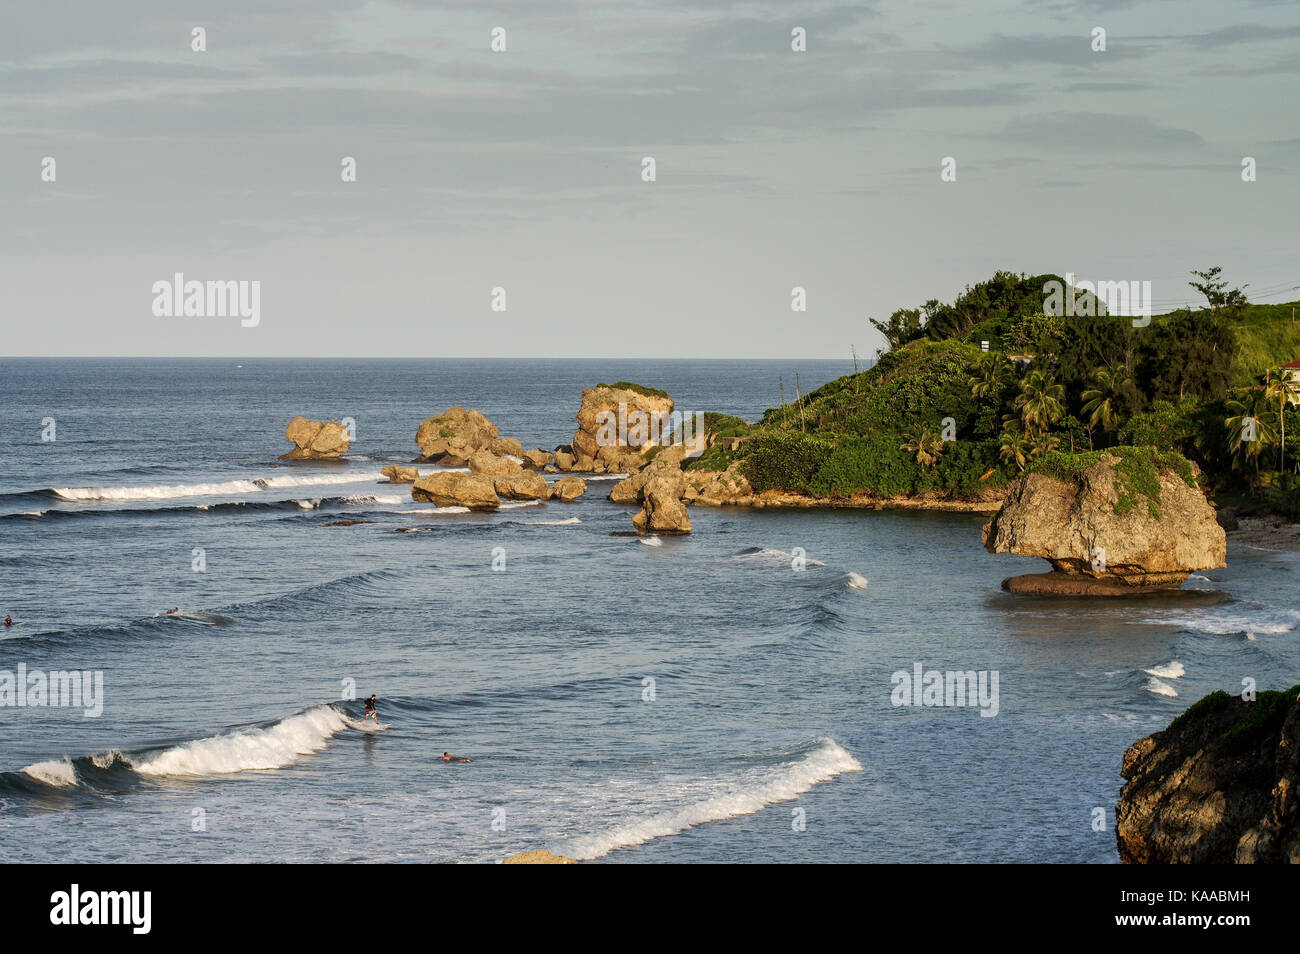 View of the rocky coast surrounding Bathsheba and the famous mushroom rock on the east coast of Barbados Stock Photo